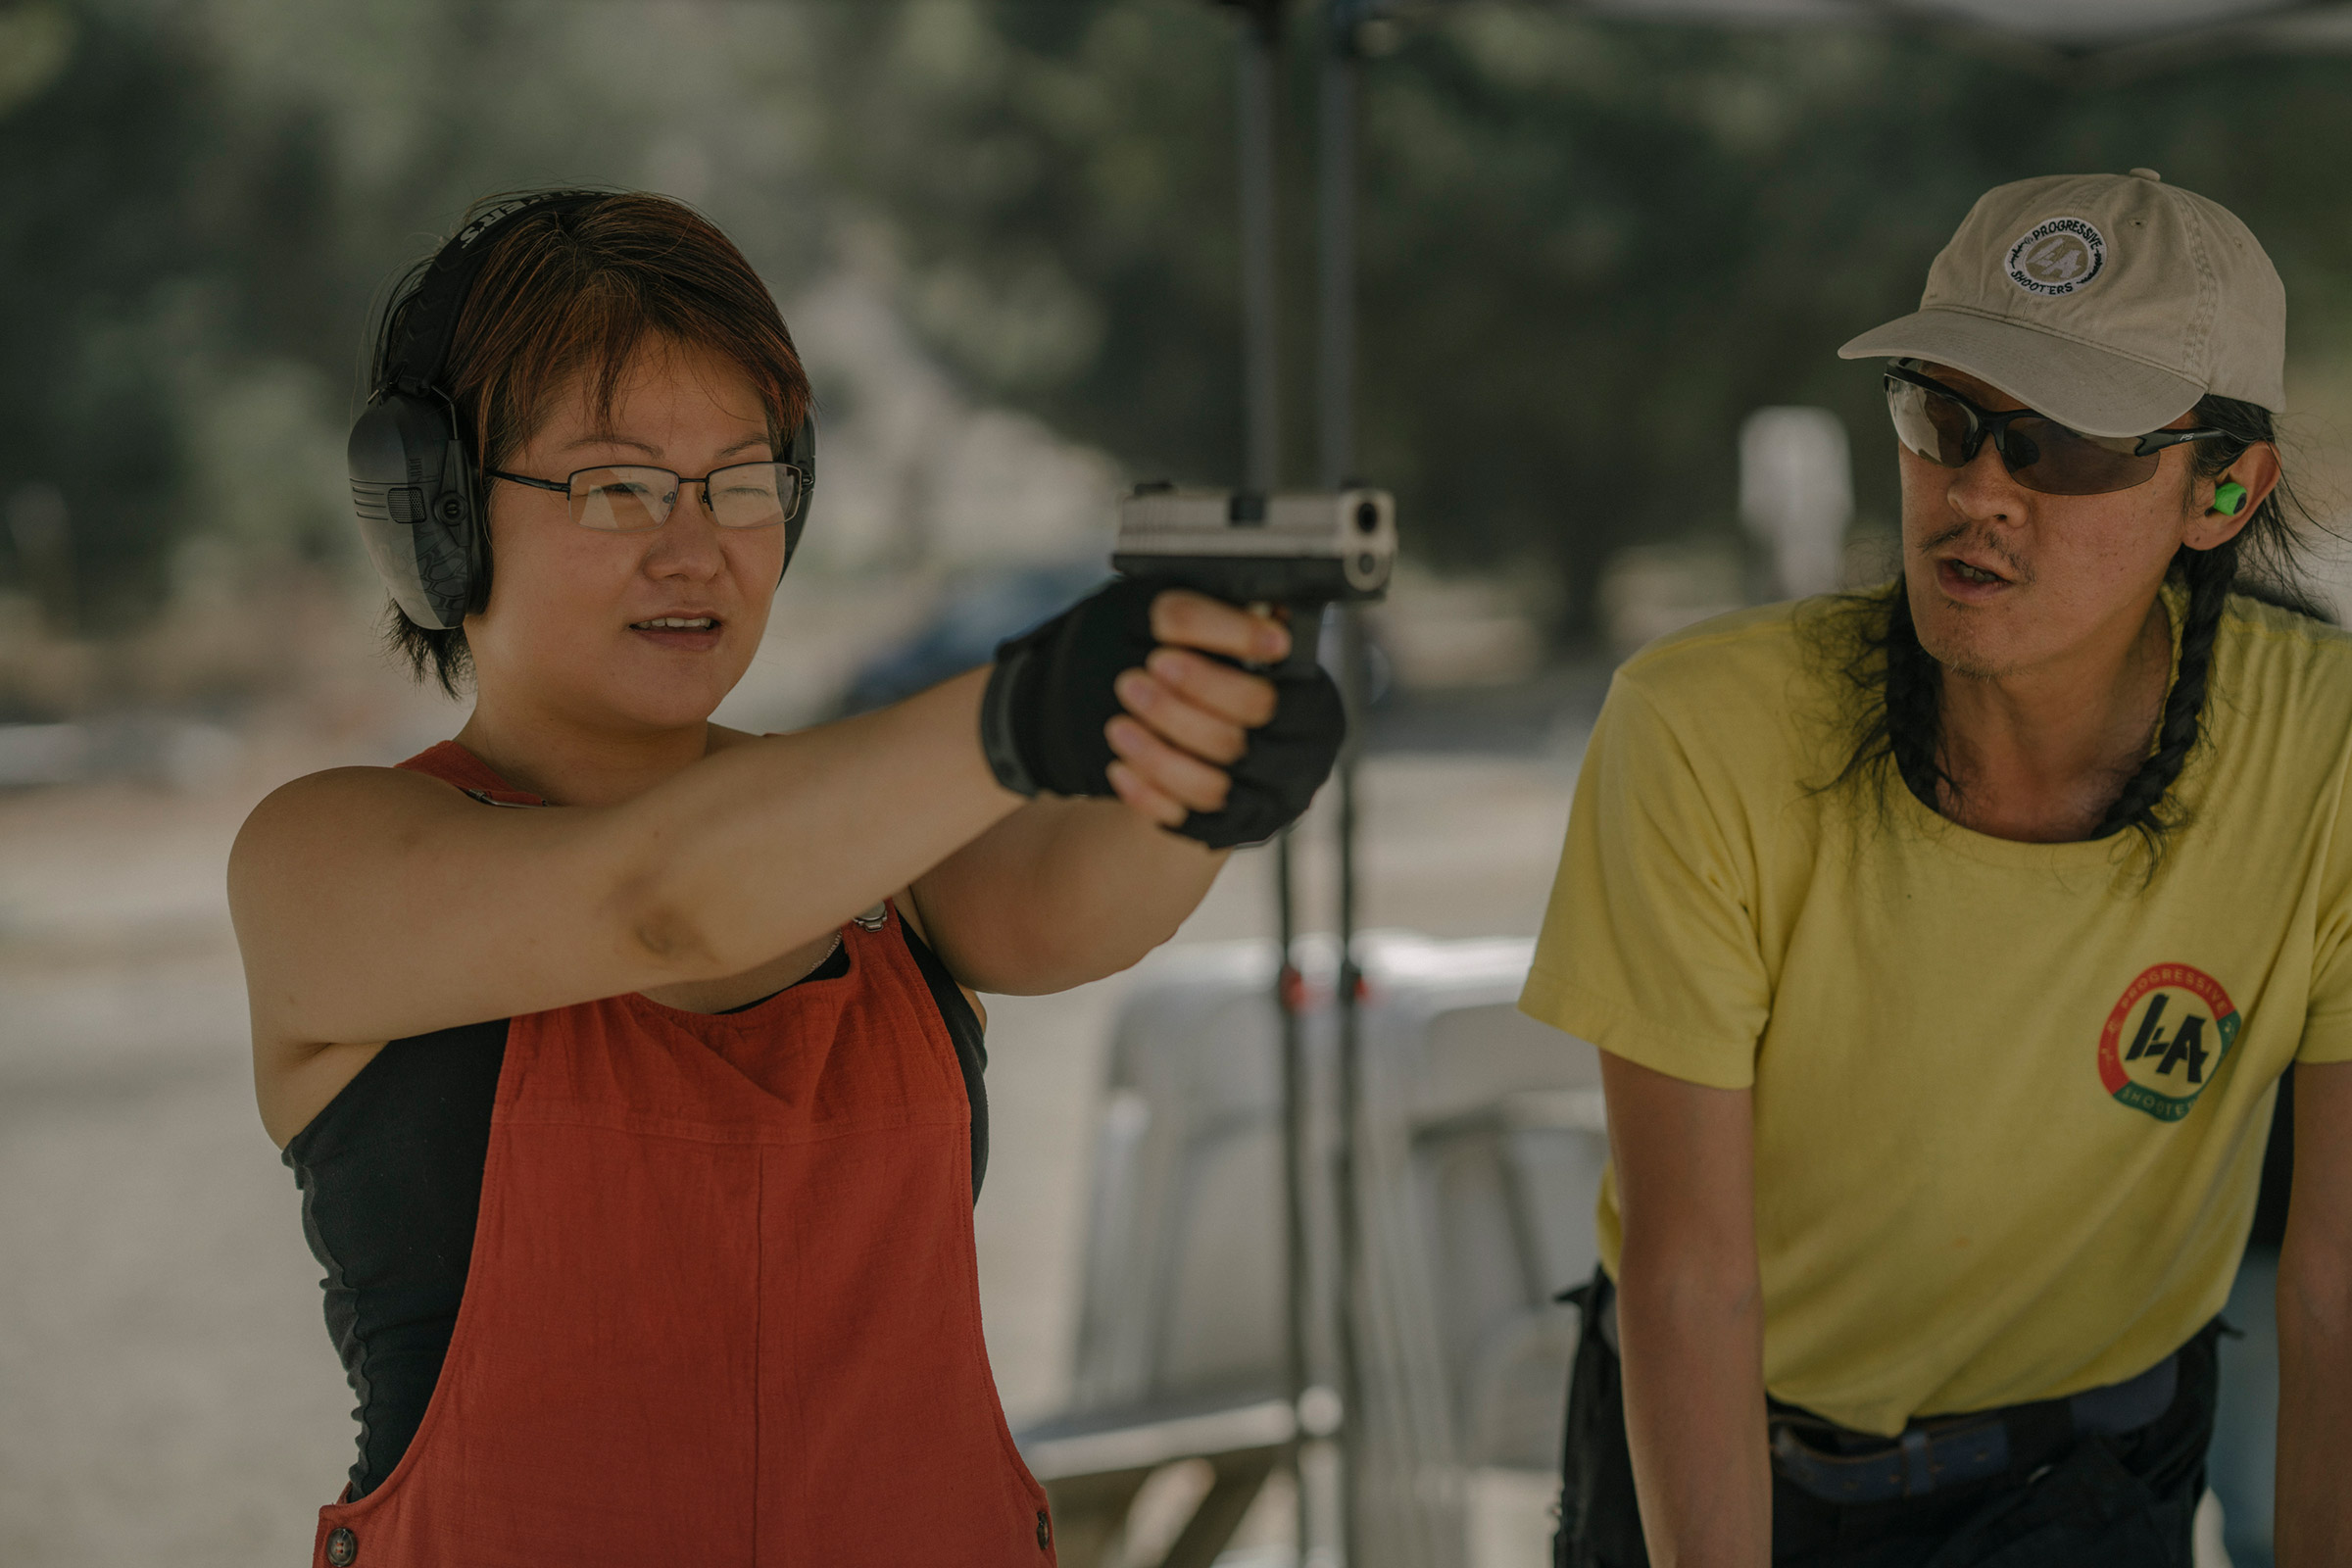 Svetlana Kim practices shooting her new handgun while standing next to Tom Nguyen, instructor and founder of L.A. Progressive Shooters, at the Burro Canyon Shooting Park in Azusa, CA on July 18, 2020.  Nguyen founded L.A. Progressive Shooters in the hopes of diversifying the population of gun owners. (Isadora Kosofsky for TIME)